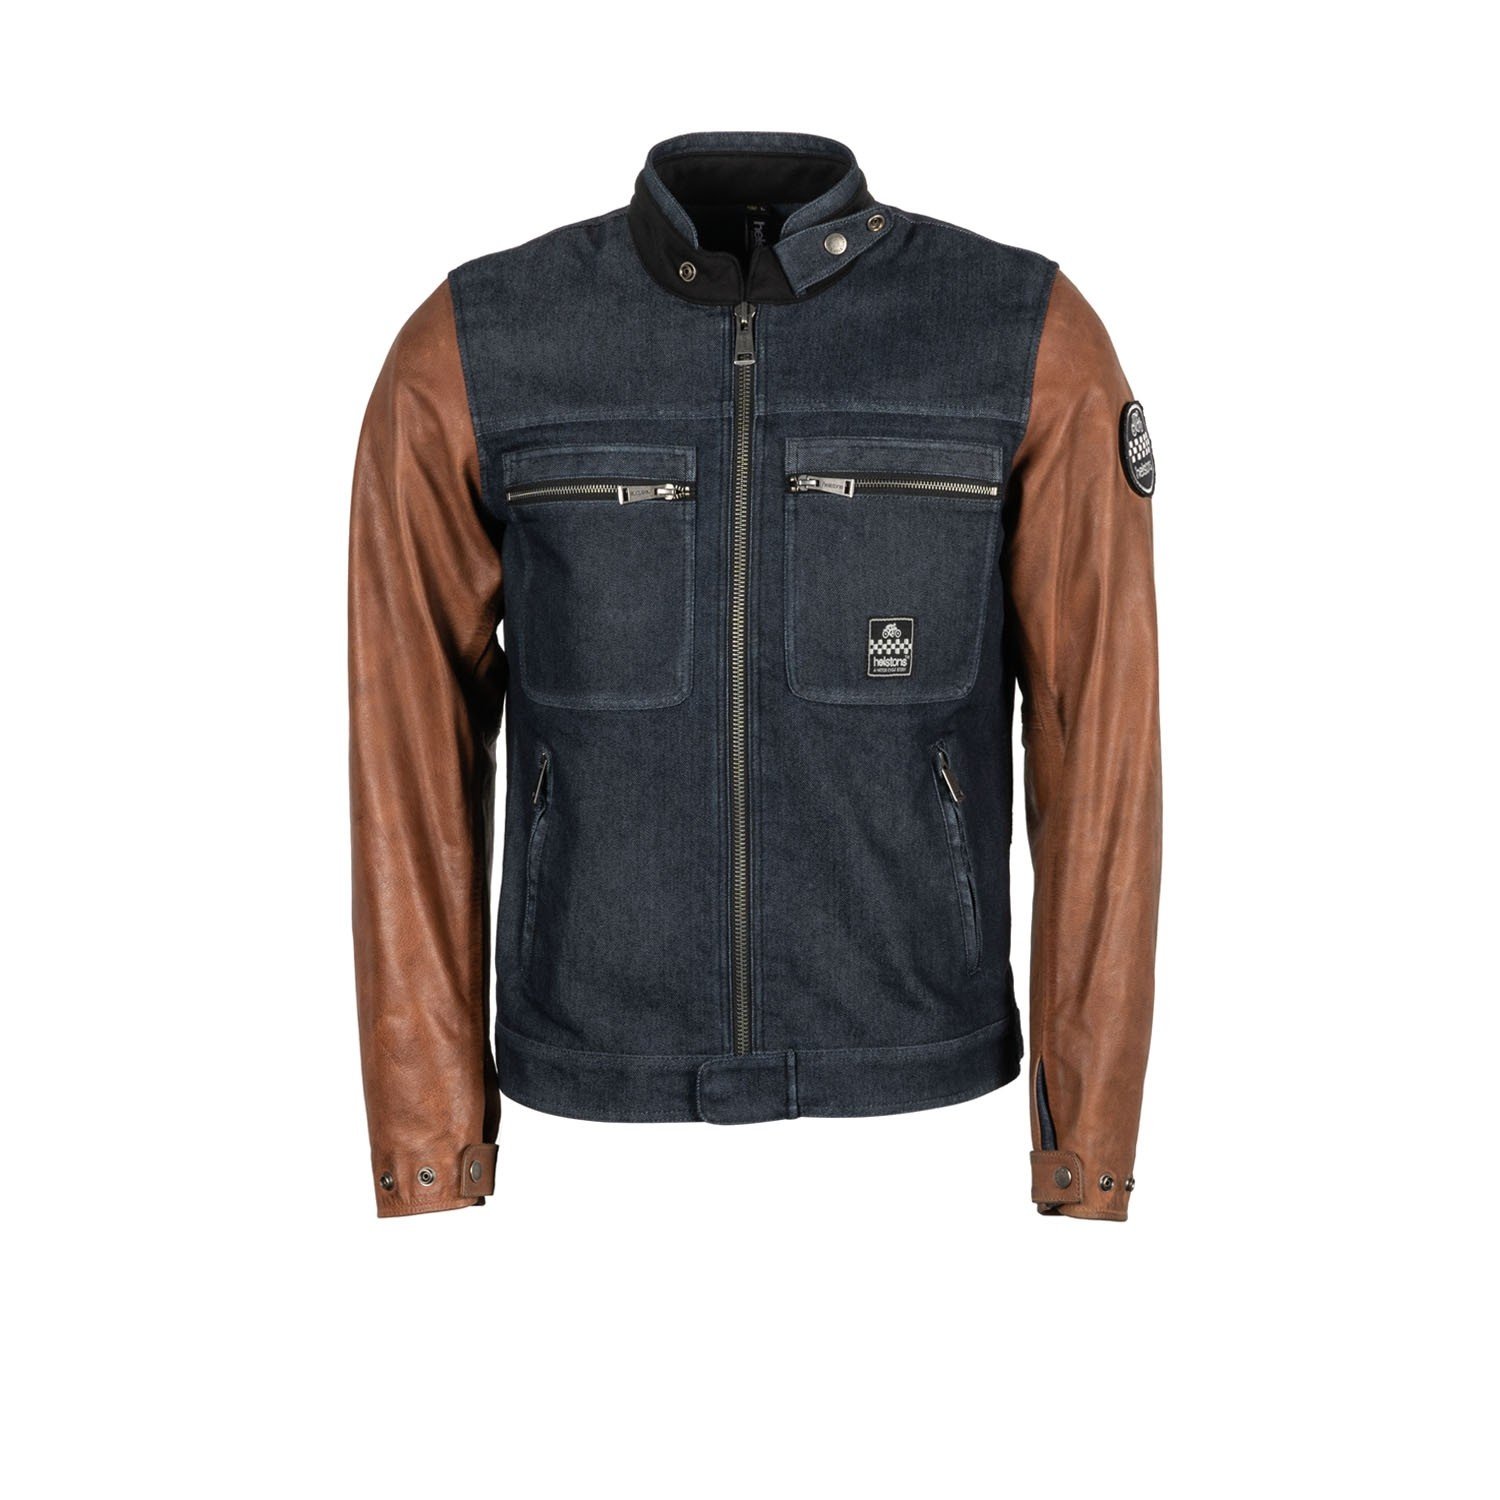 Image of Helstons Winston Canvas Cotton Leather Jacket Blue Brown Size XL ID 3662136084148